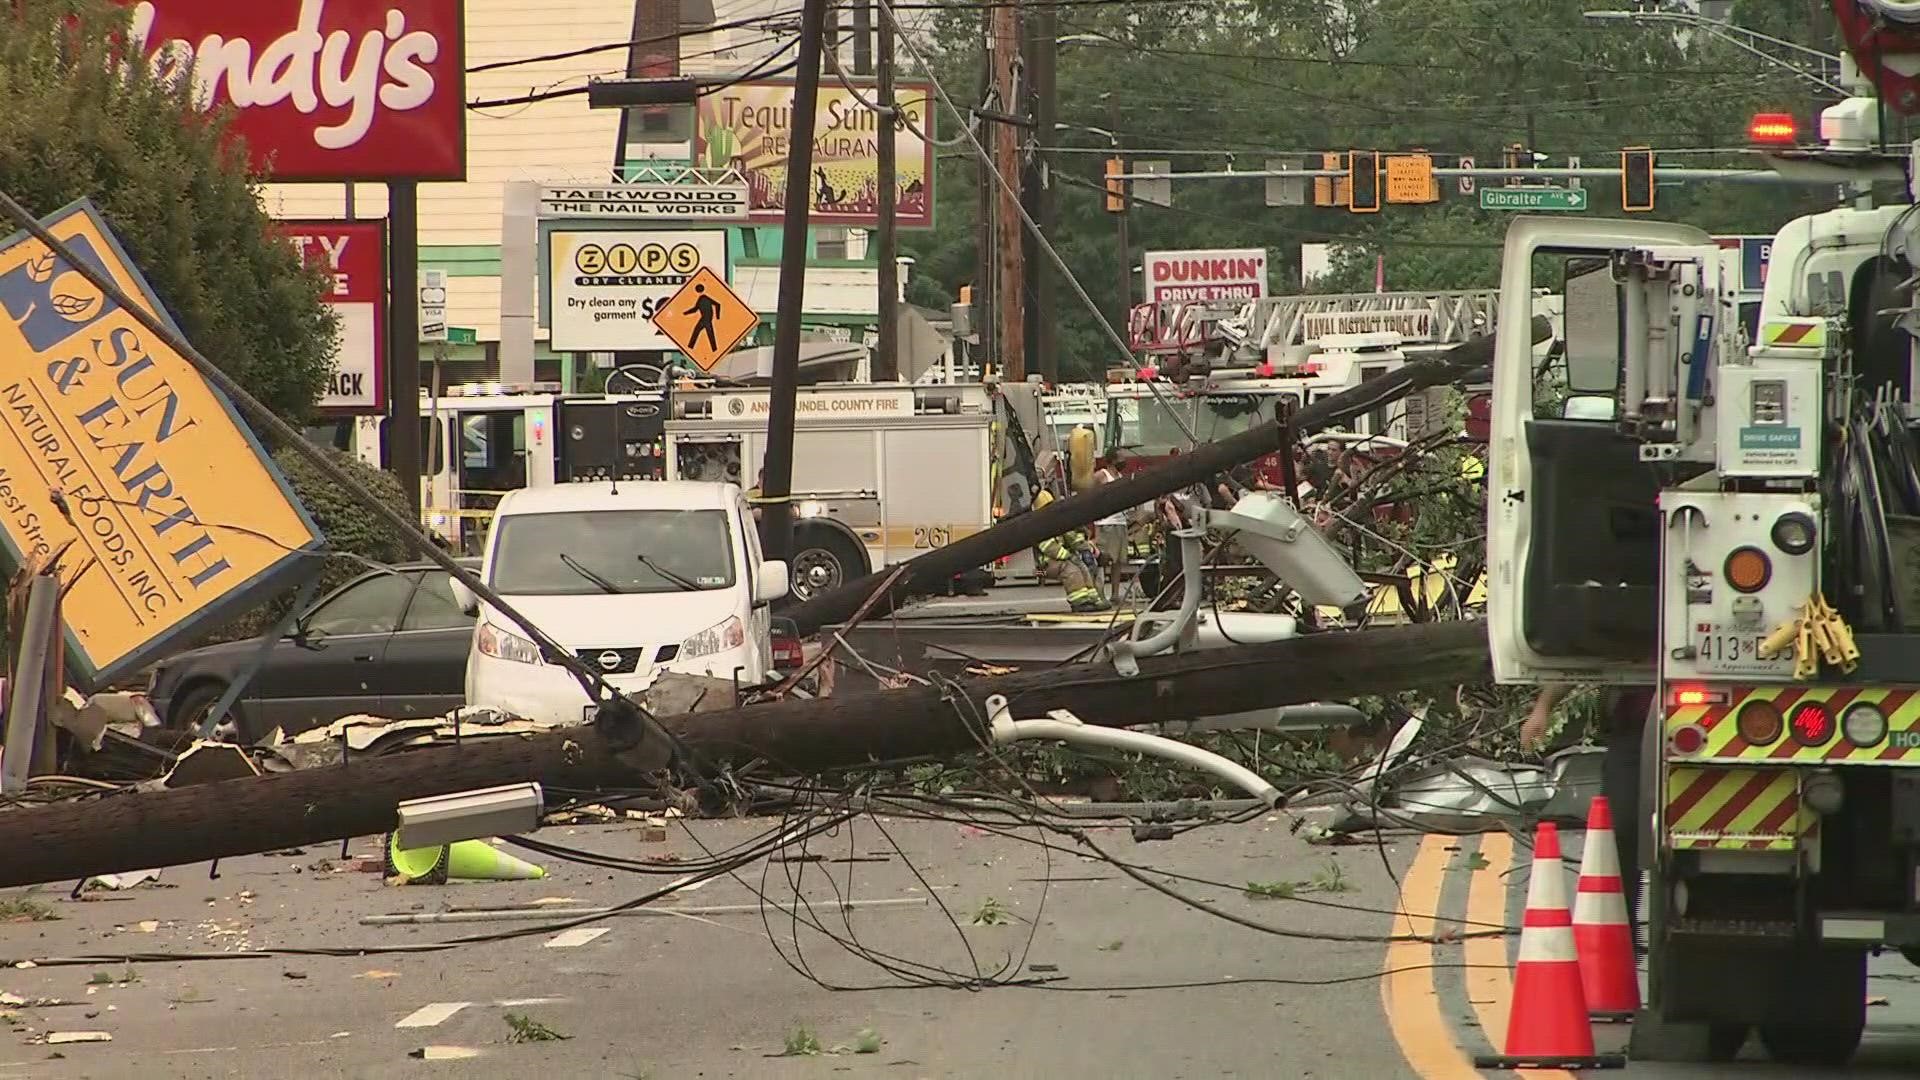 This is the scene of the aftermath of a possible tornado coming through West Street in Annapolis.